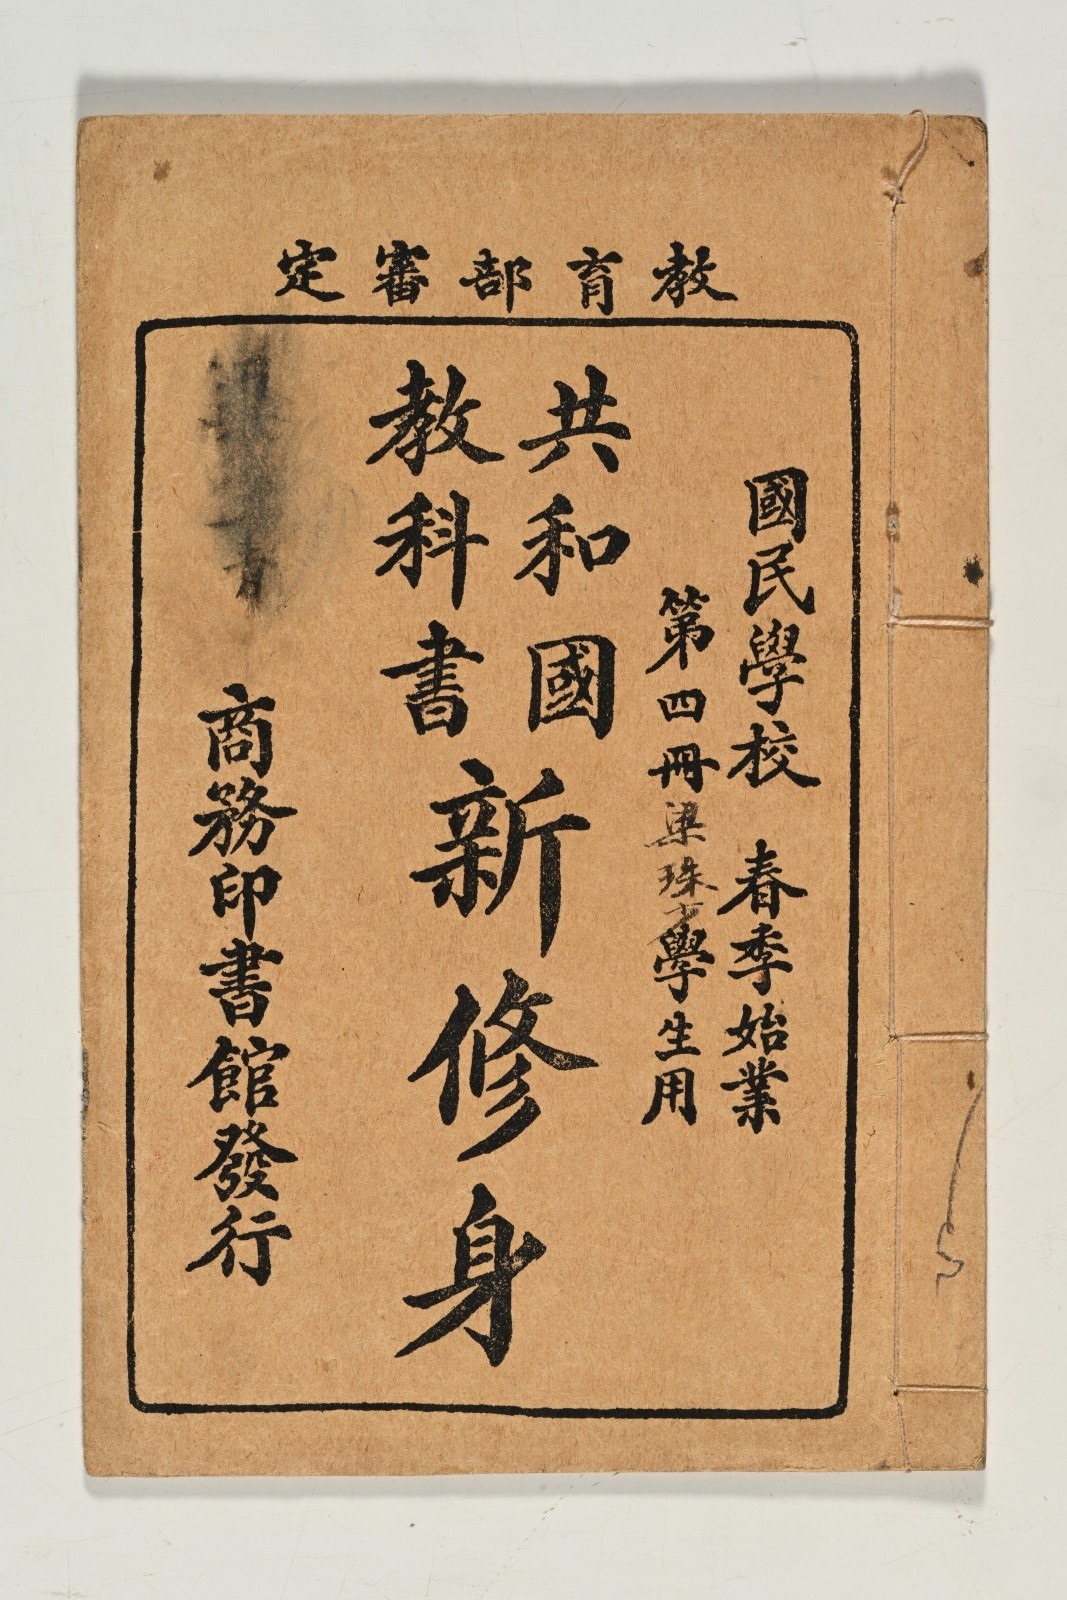 <em>Gongheguo Jiaokeshu: Xinxiushen</em> ("Textbook for the Republic: New personal growth", book 4), distributed by The Commercial Press, March 1922.